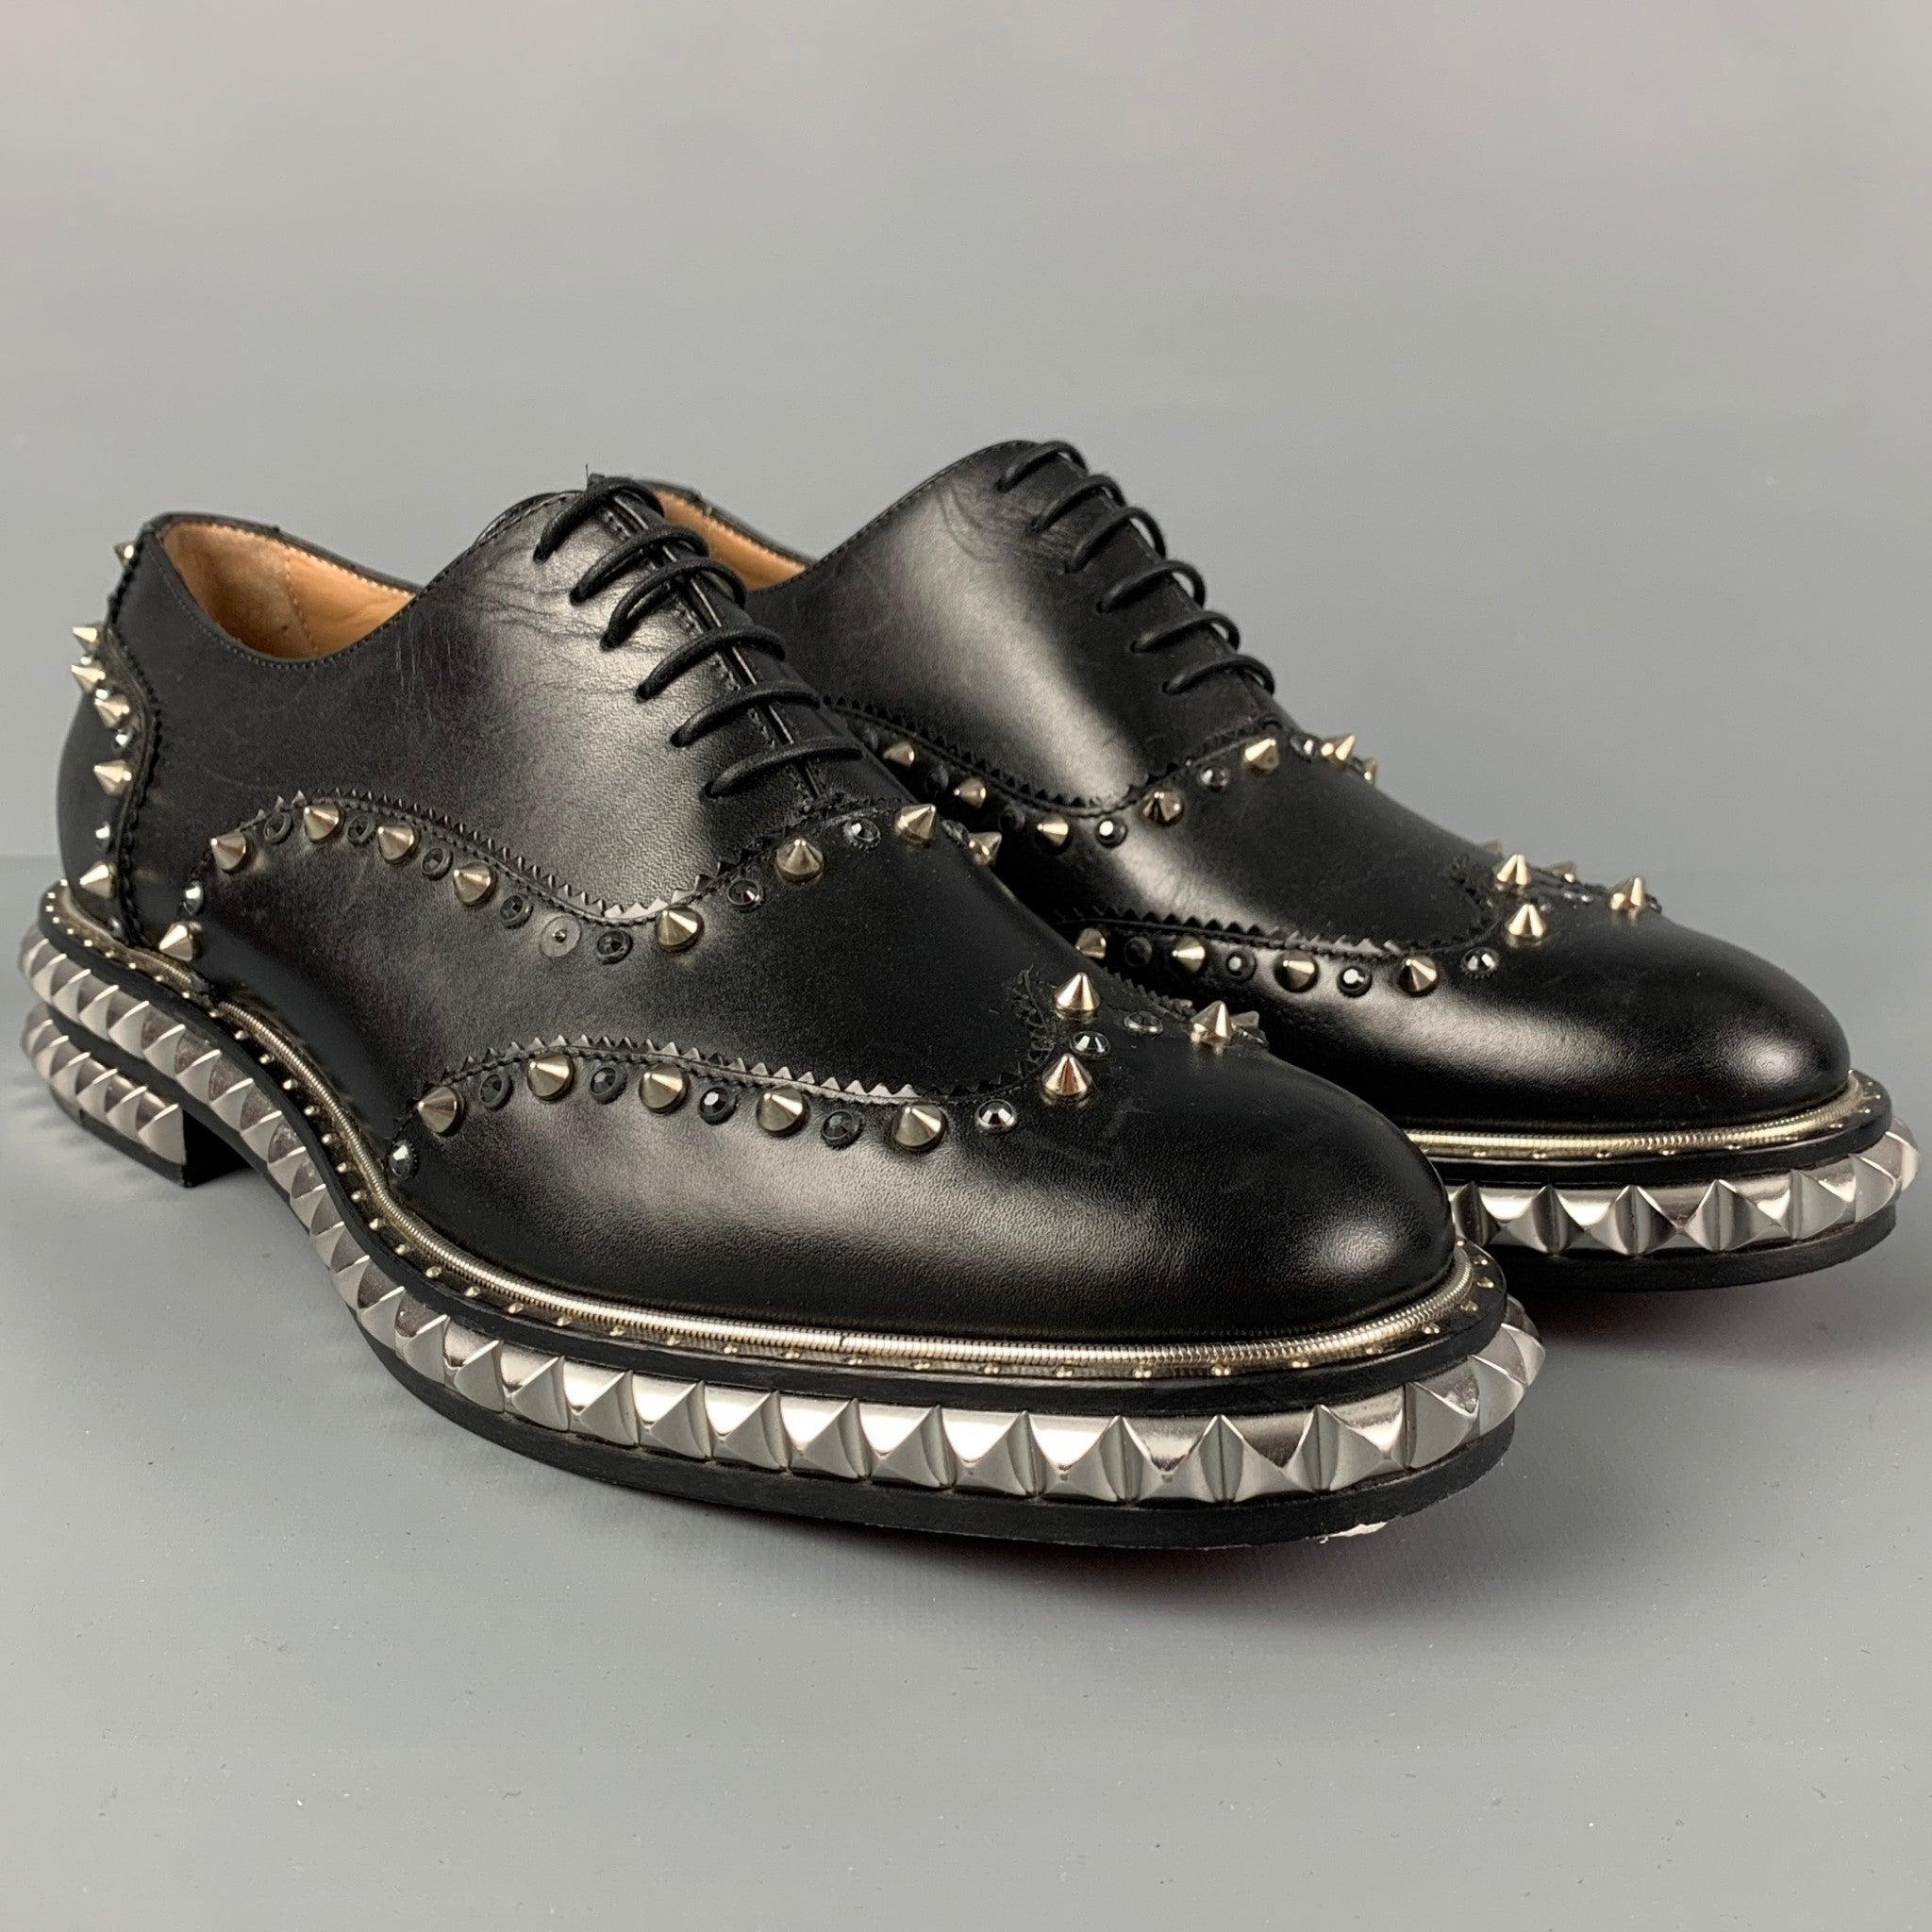 CHRISTINA LOUBOUTIN shoes comes in a black leather featuring studded details, wingtip style, signature red sole, and a lace up closure. Made in Italy.
Very Good Pre-Owned Condition.
 Minor wear, missing a stud. 

Marked:   41Outsole: 12 inches  x 4